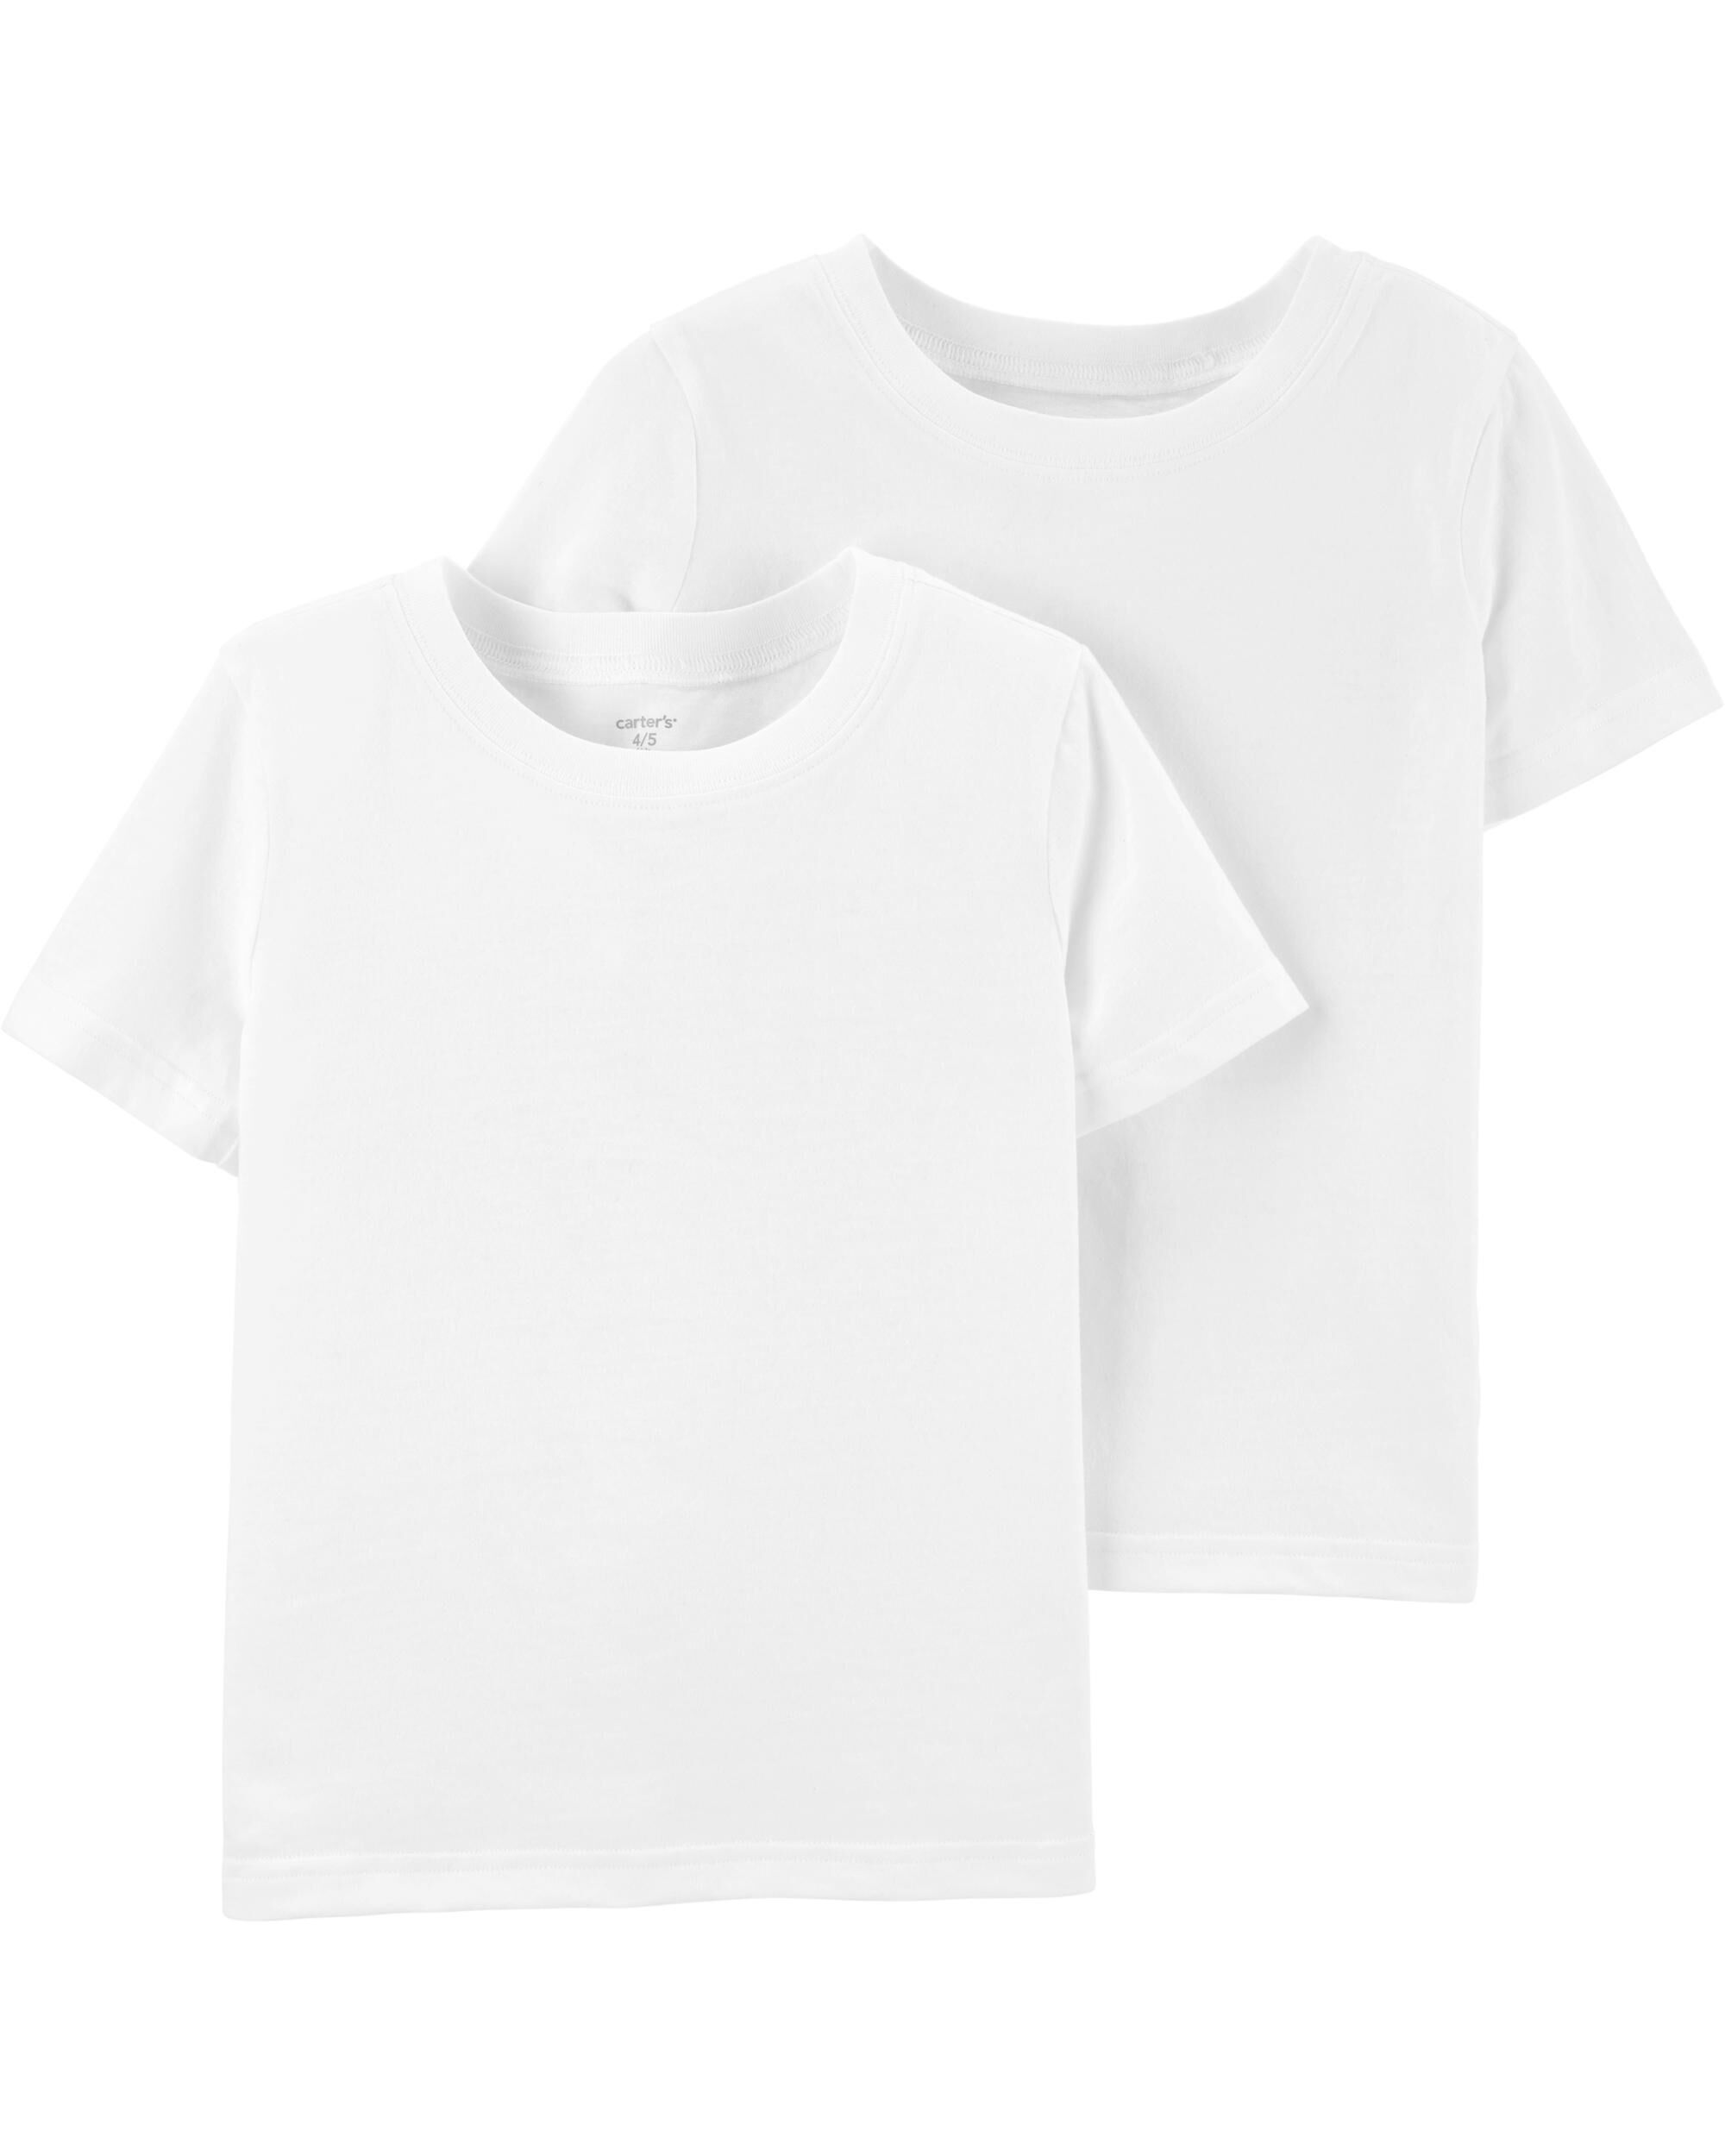 Carters Boys Toddler 3-Pack Short-Sleeve Graphic Tee 